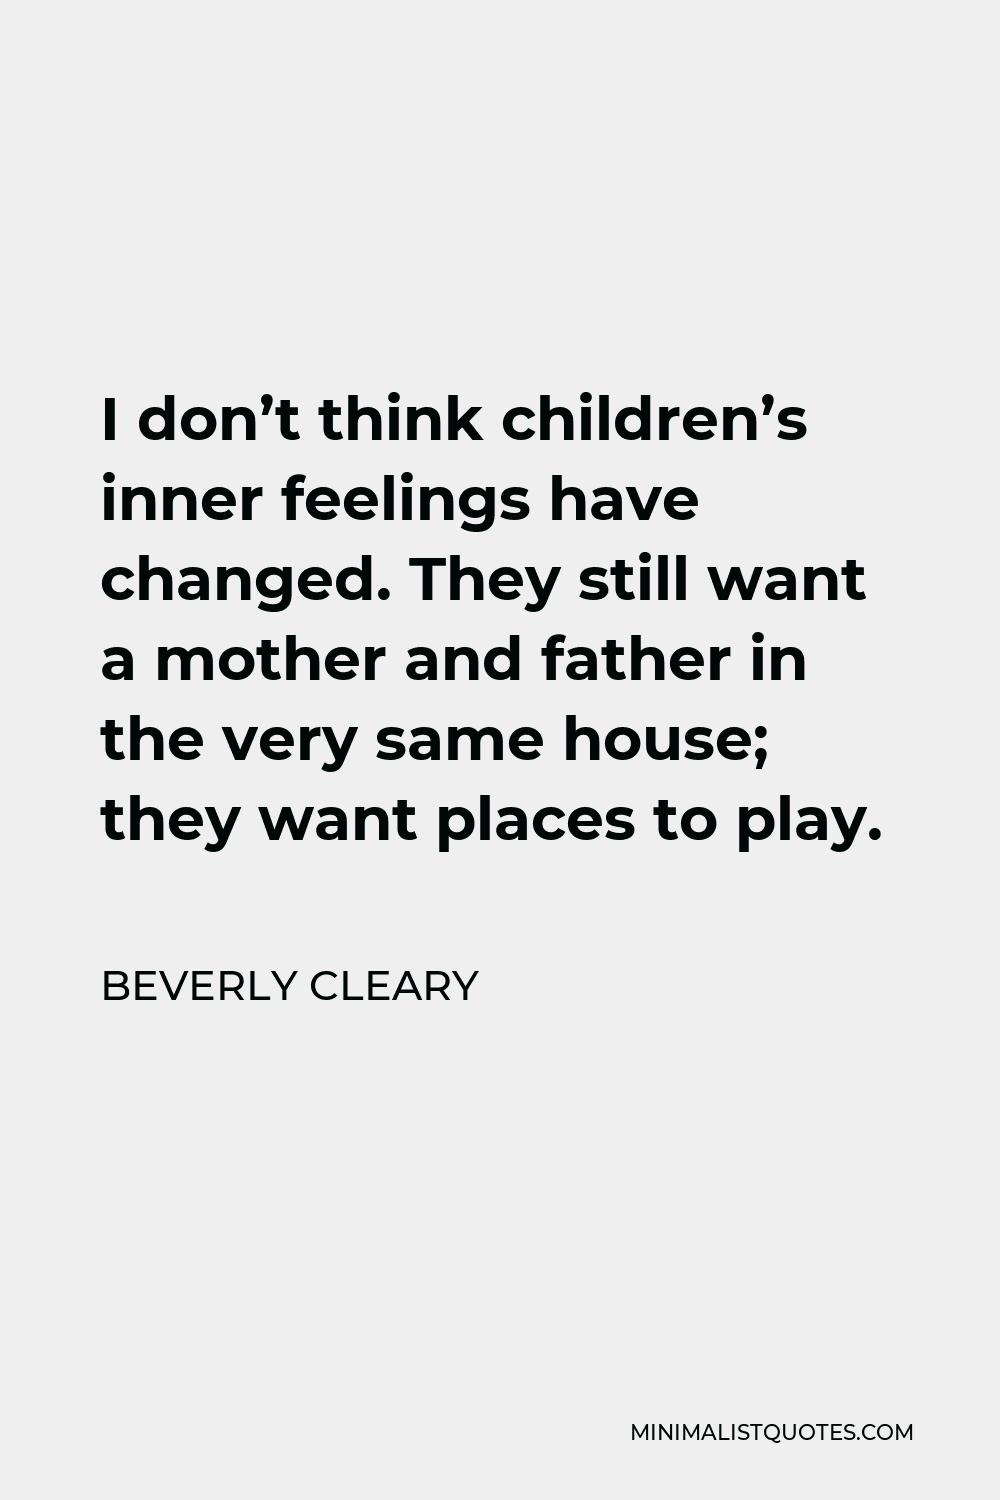 Beverly Cleary Quote - I don’t think children’s inner feelings have changed. They still want a mother and father in the very same house; they want places to play.